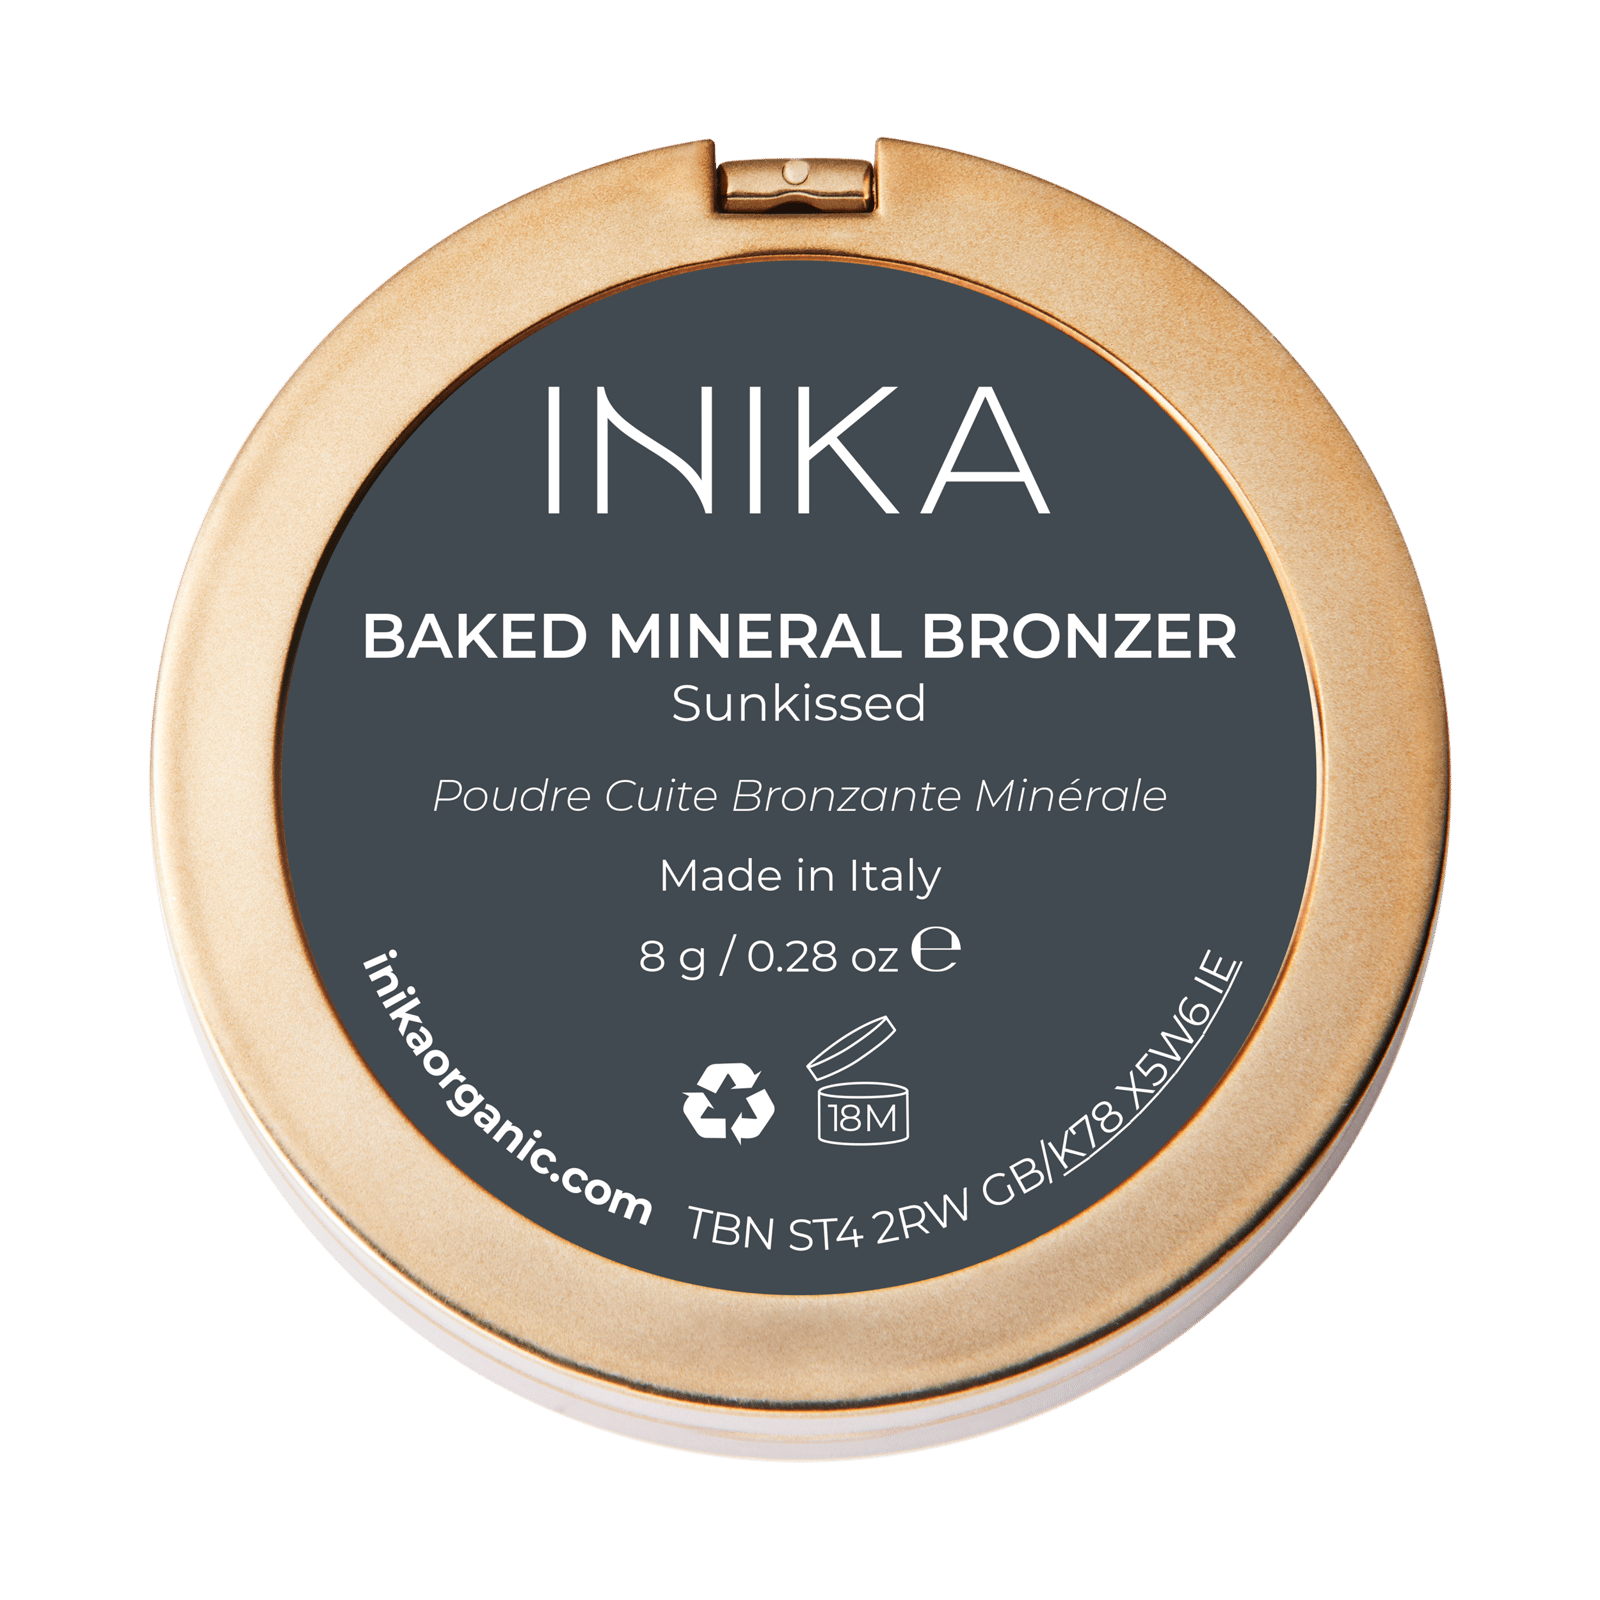 INIKA ORGANIC Baked Mineral Bronzer Sunkissed 8g